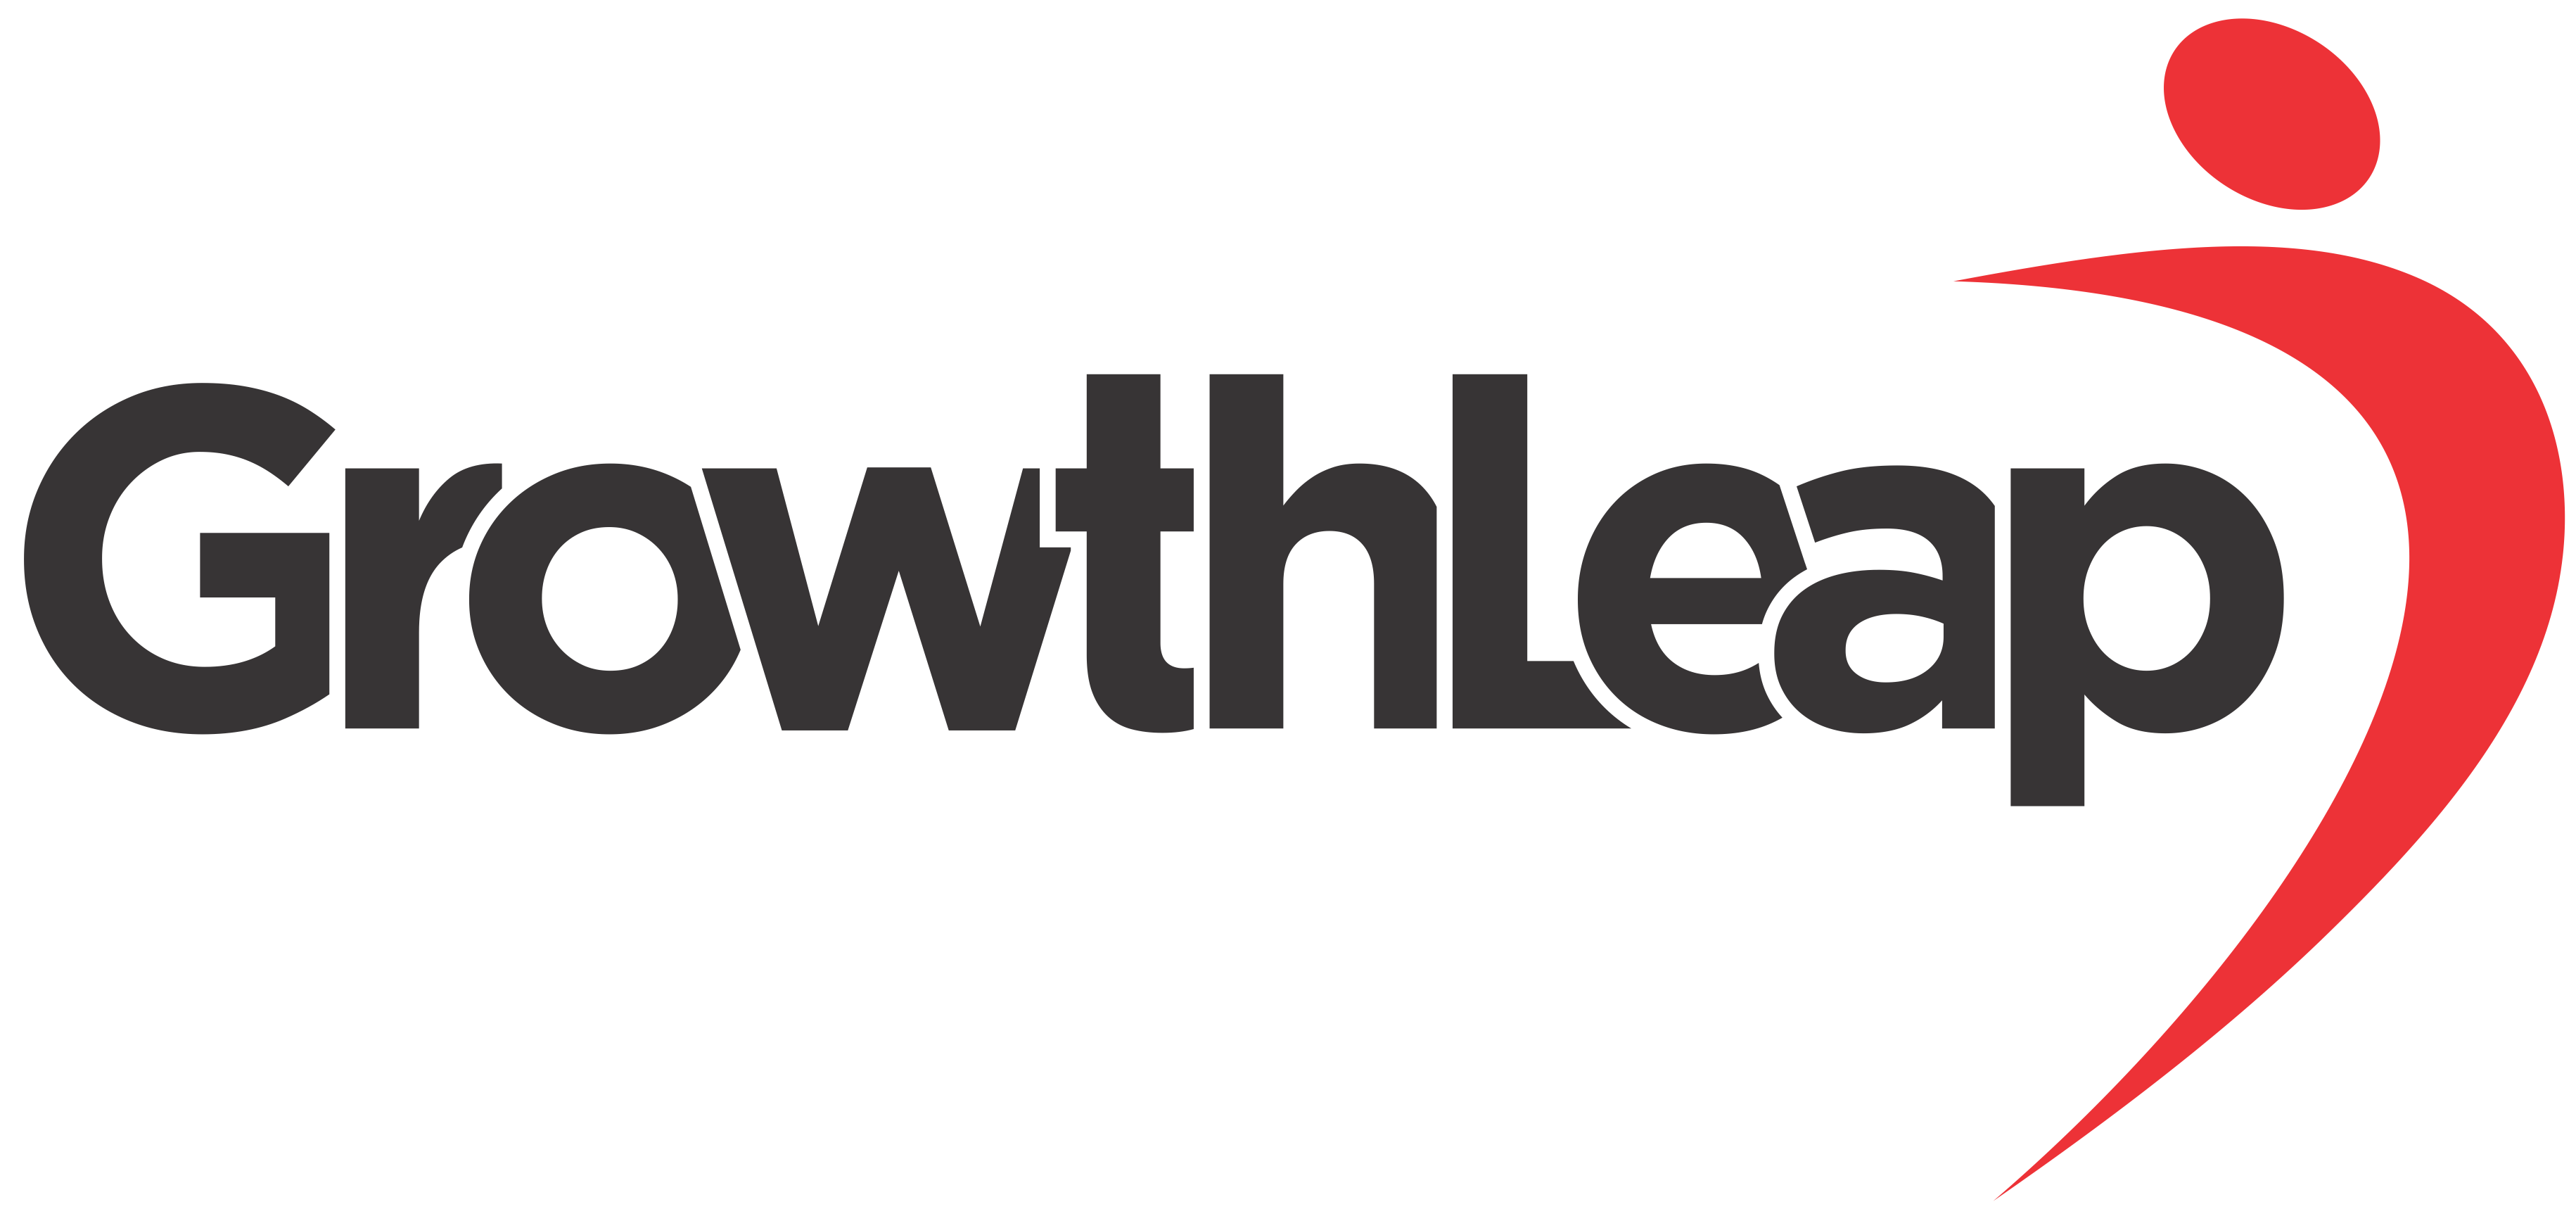 cropped-cropped-growthleap-logo.png